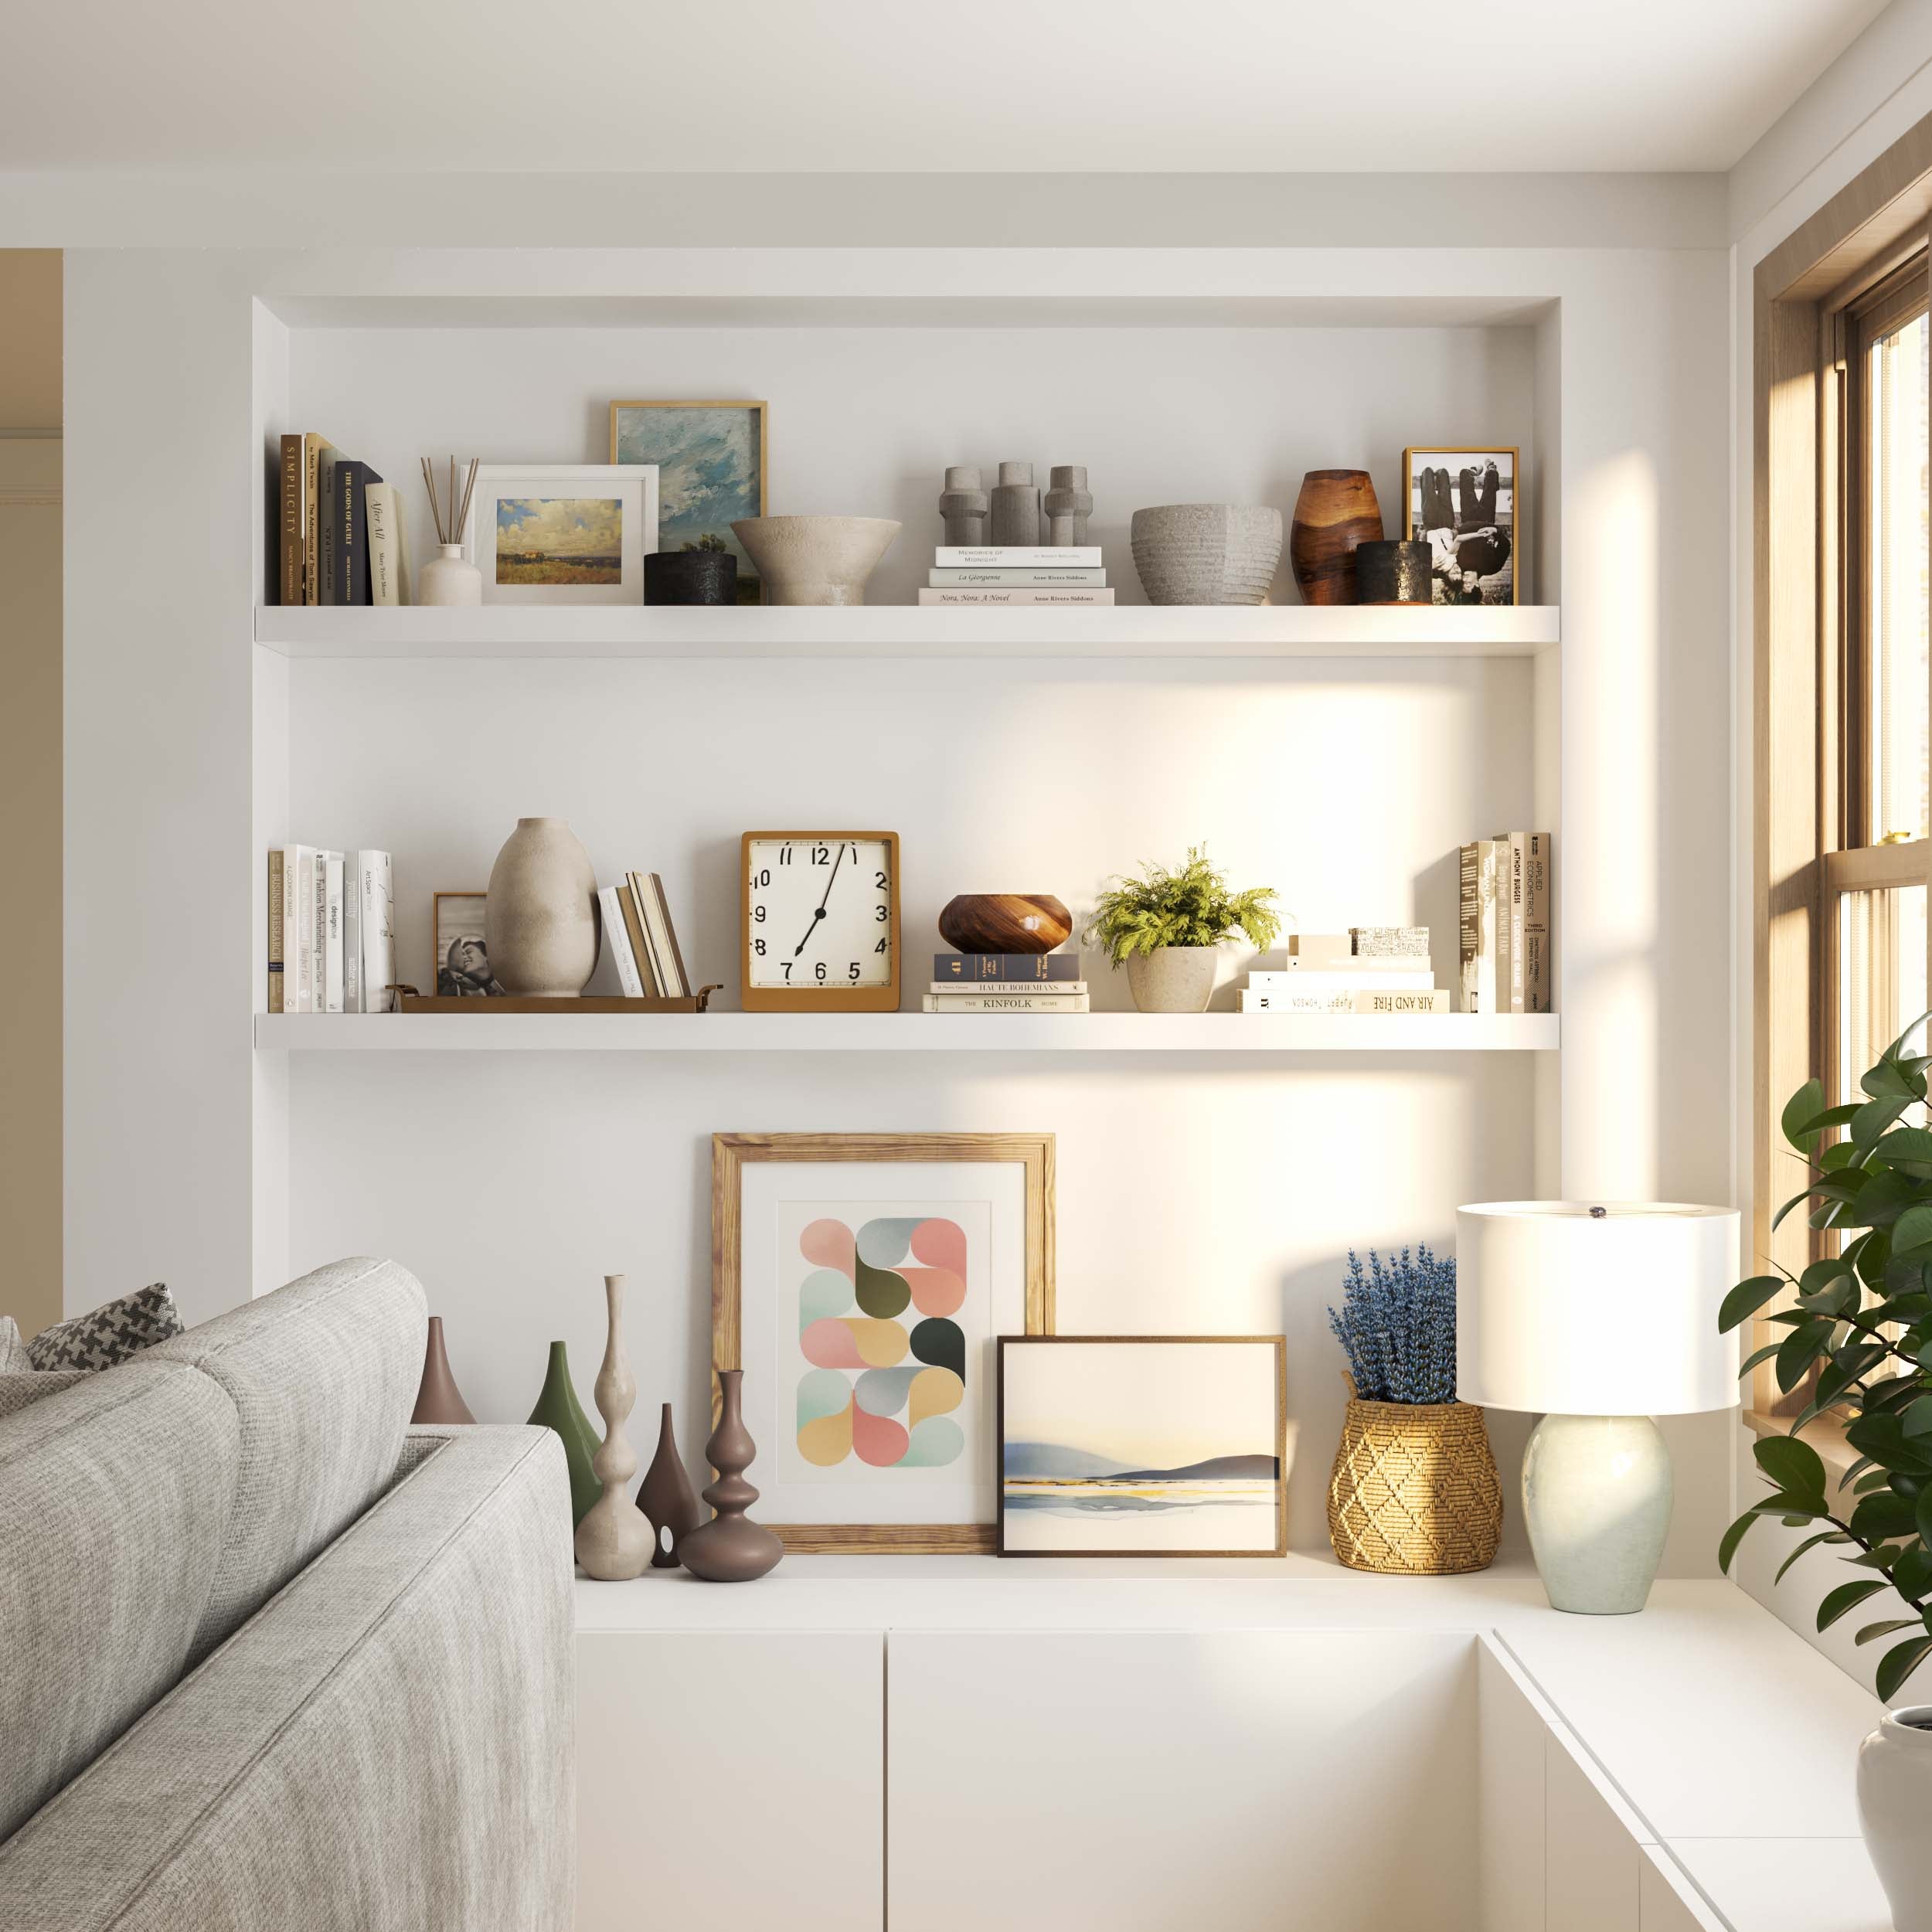 Stylishly arranged shelves featuring art prints, plants, and books, bathing in soft natural light.